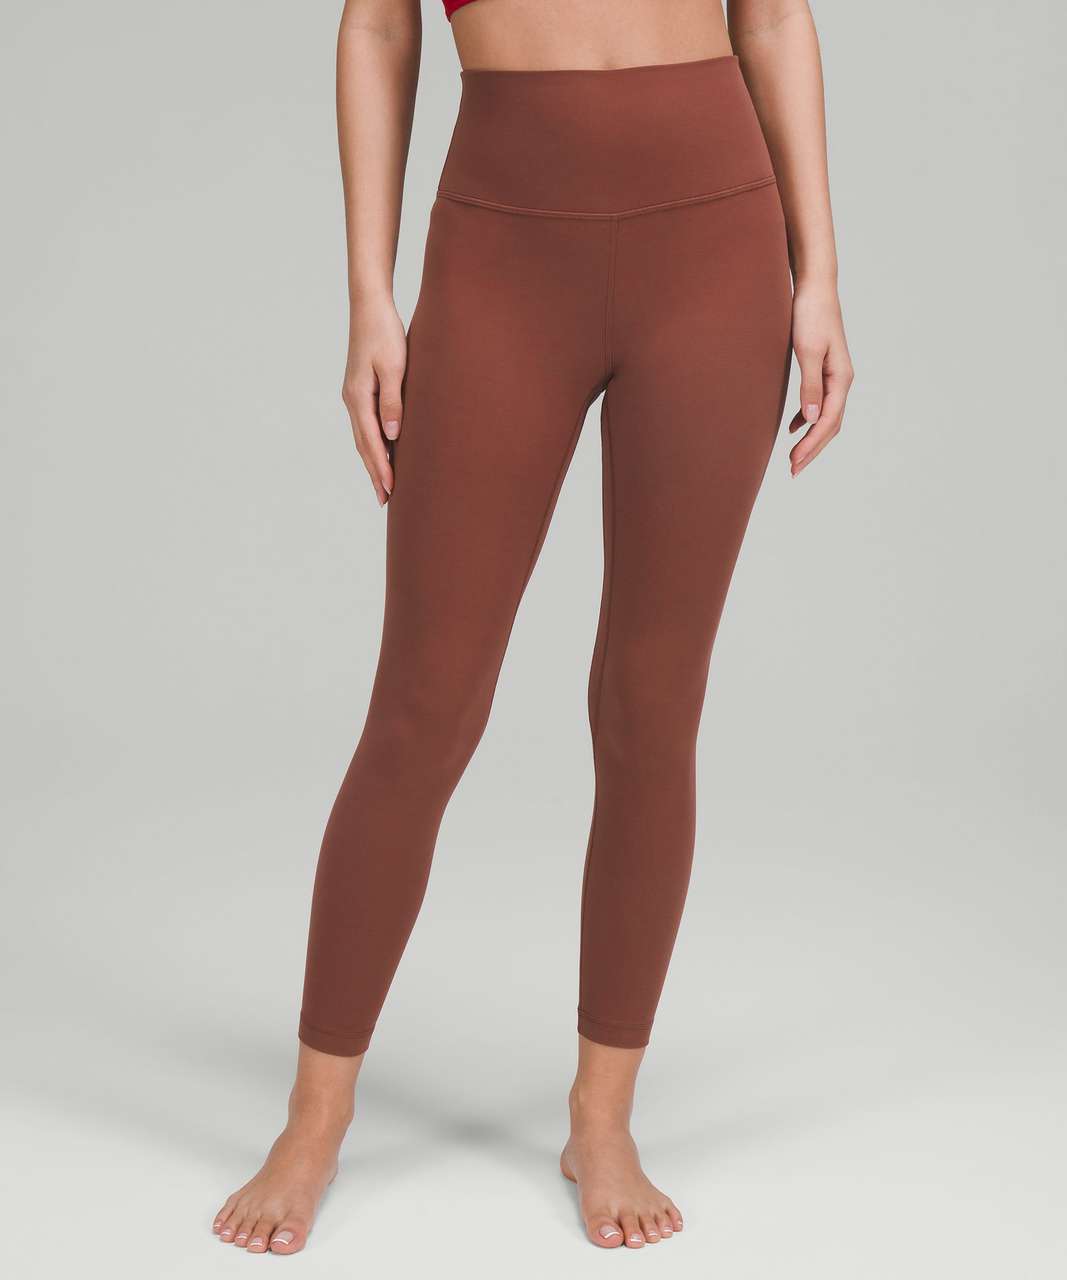 Lululemon Lunar New Year Align High-Rise Pant 25 - Smoky Red